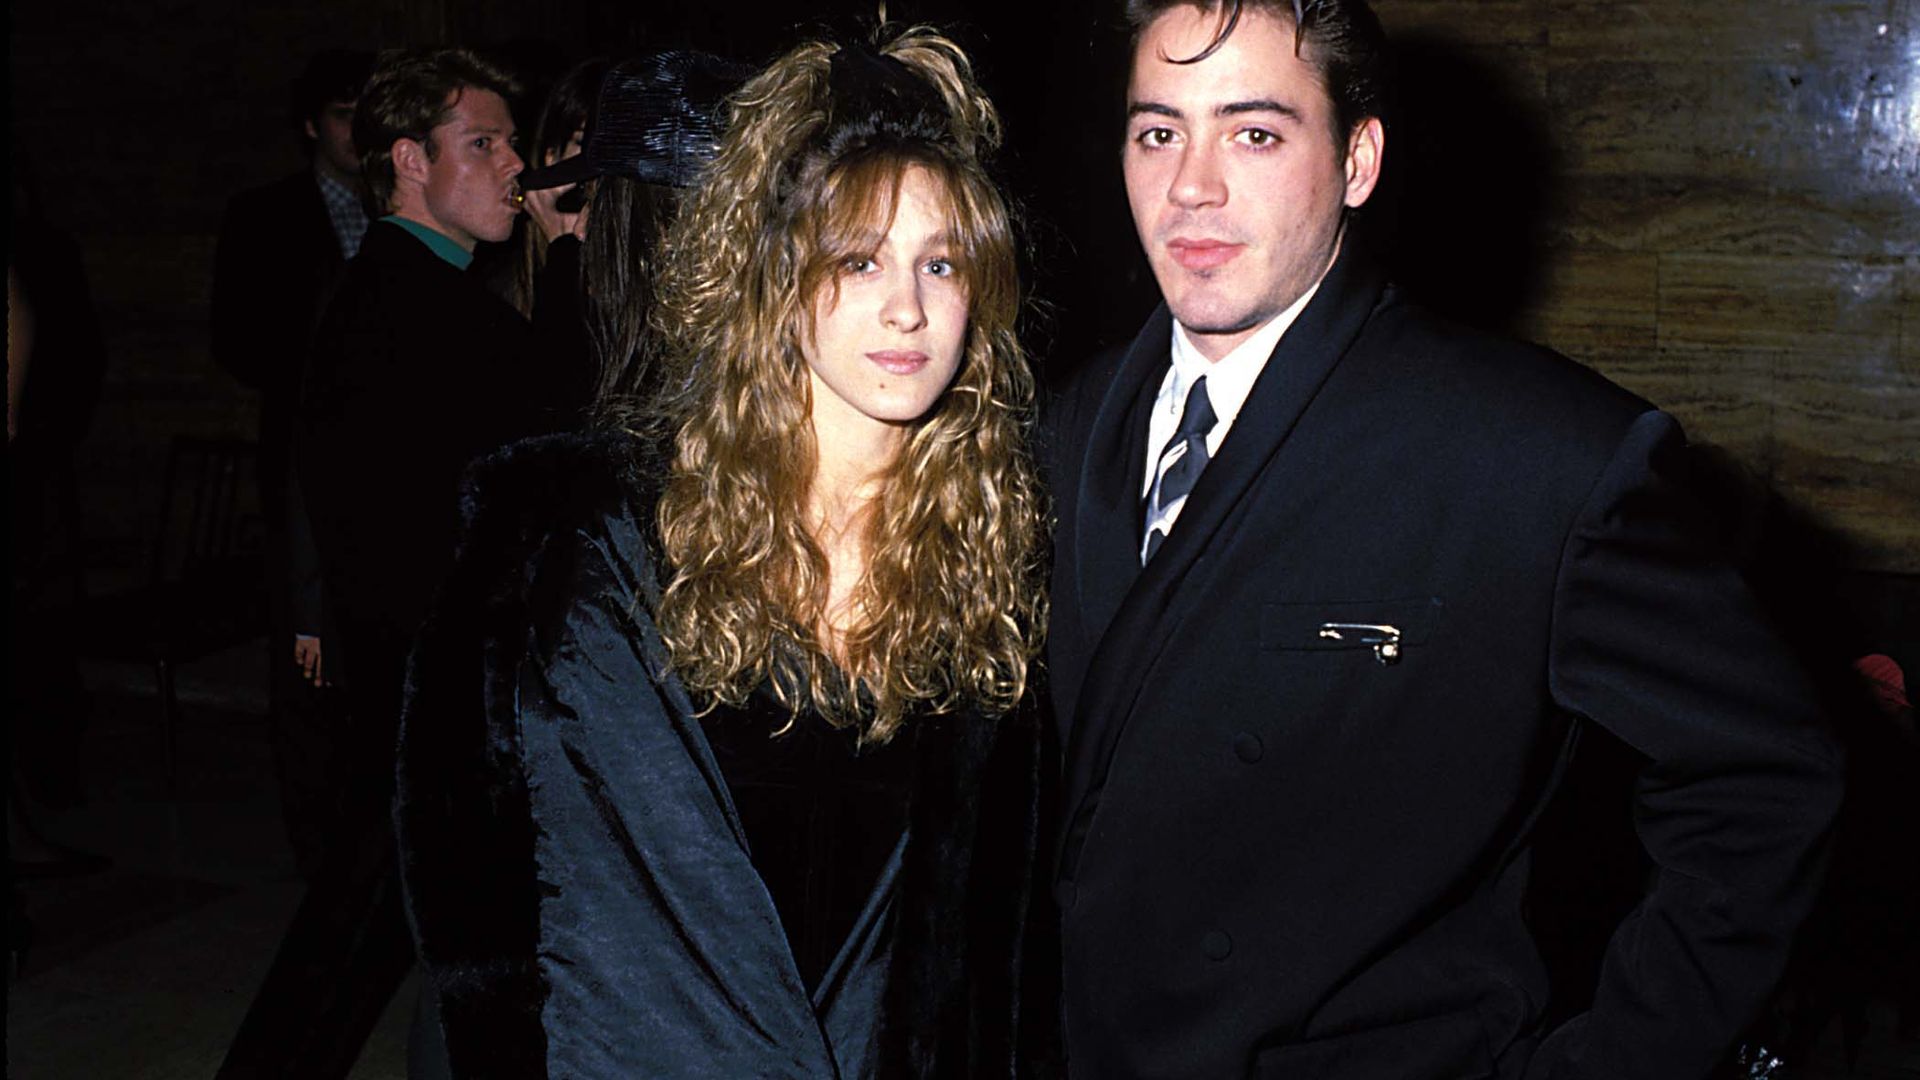 Sarah Jessica Parker opens up on her tumultuous past relationship with Robert Downey Jr.